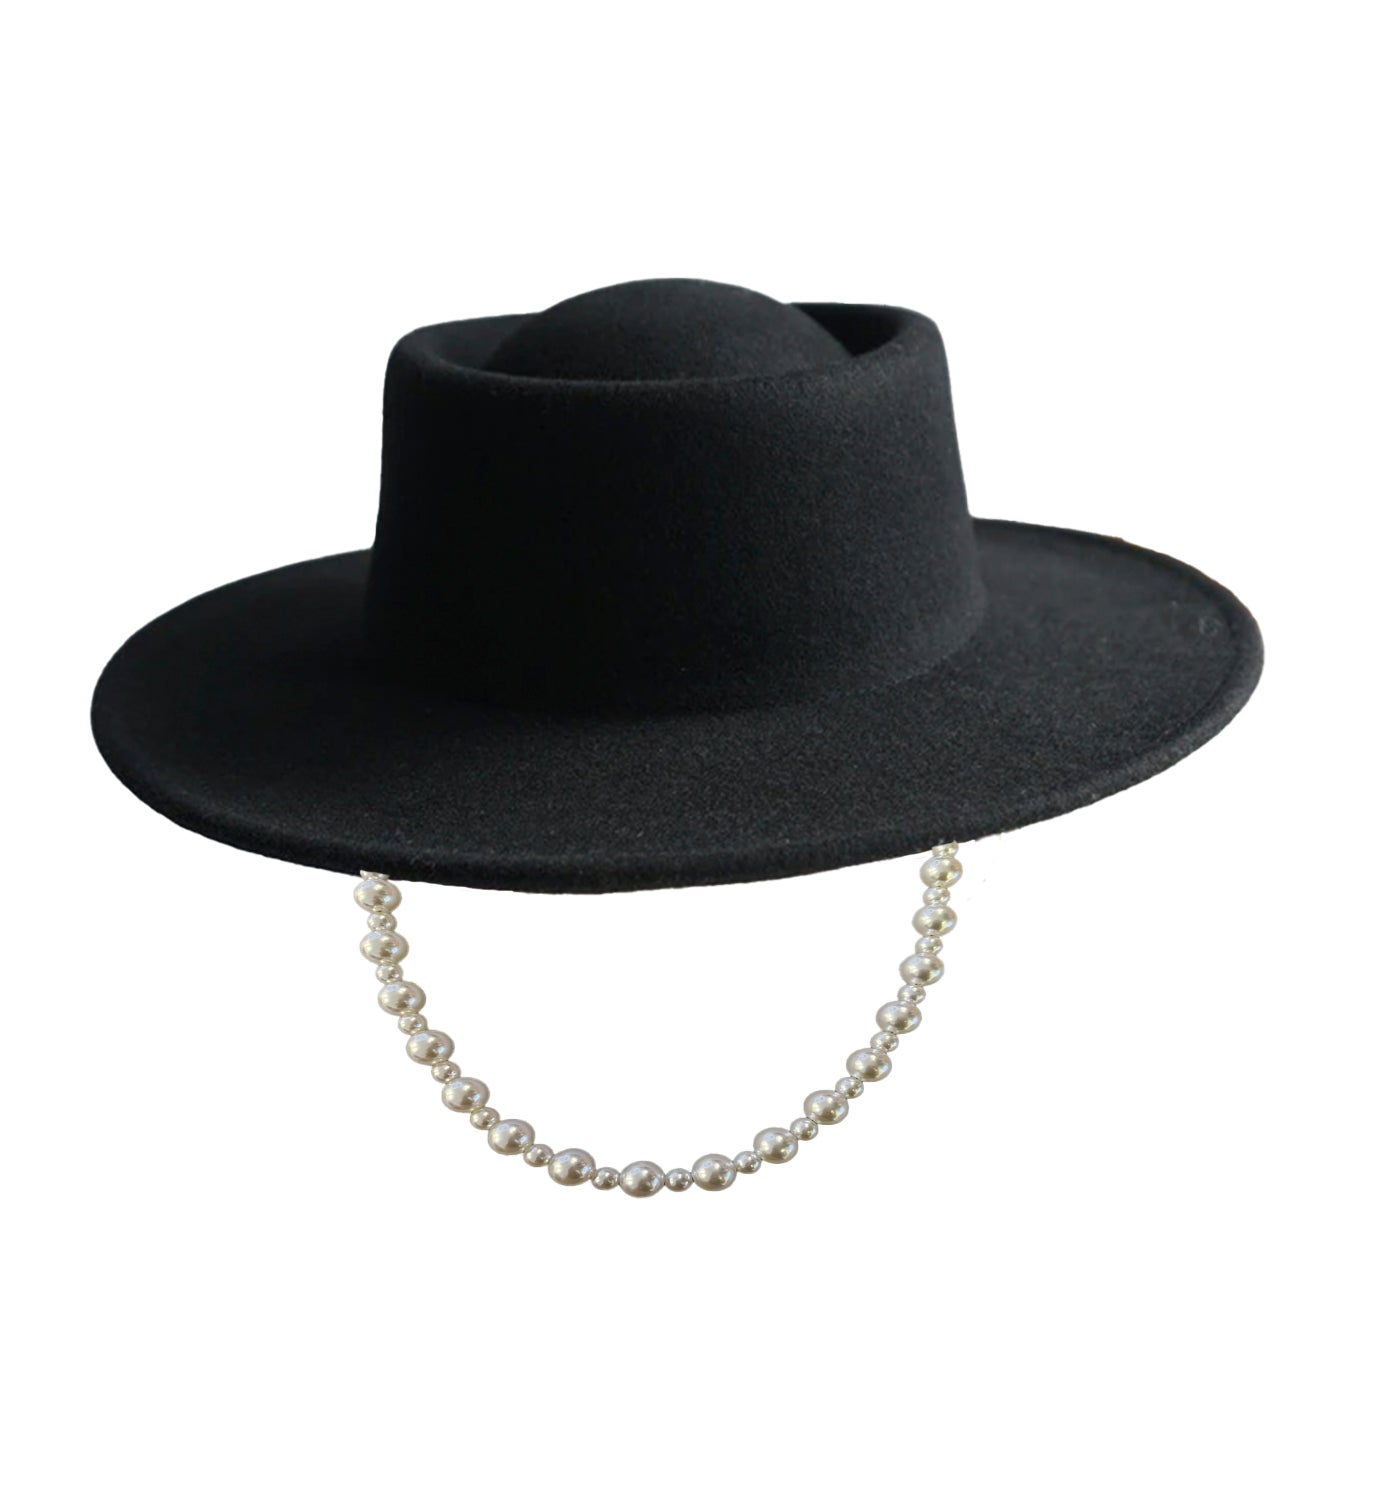 Pearl Strap Fedora Hat - DIGS